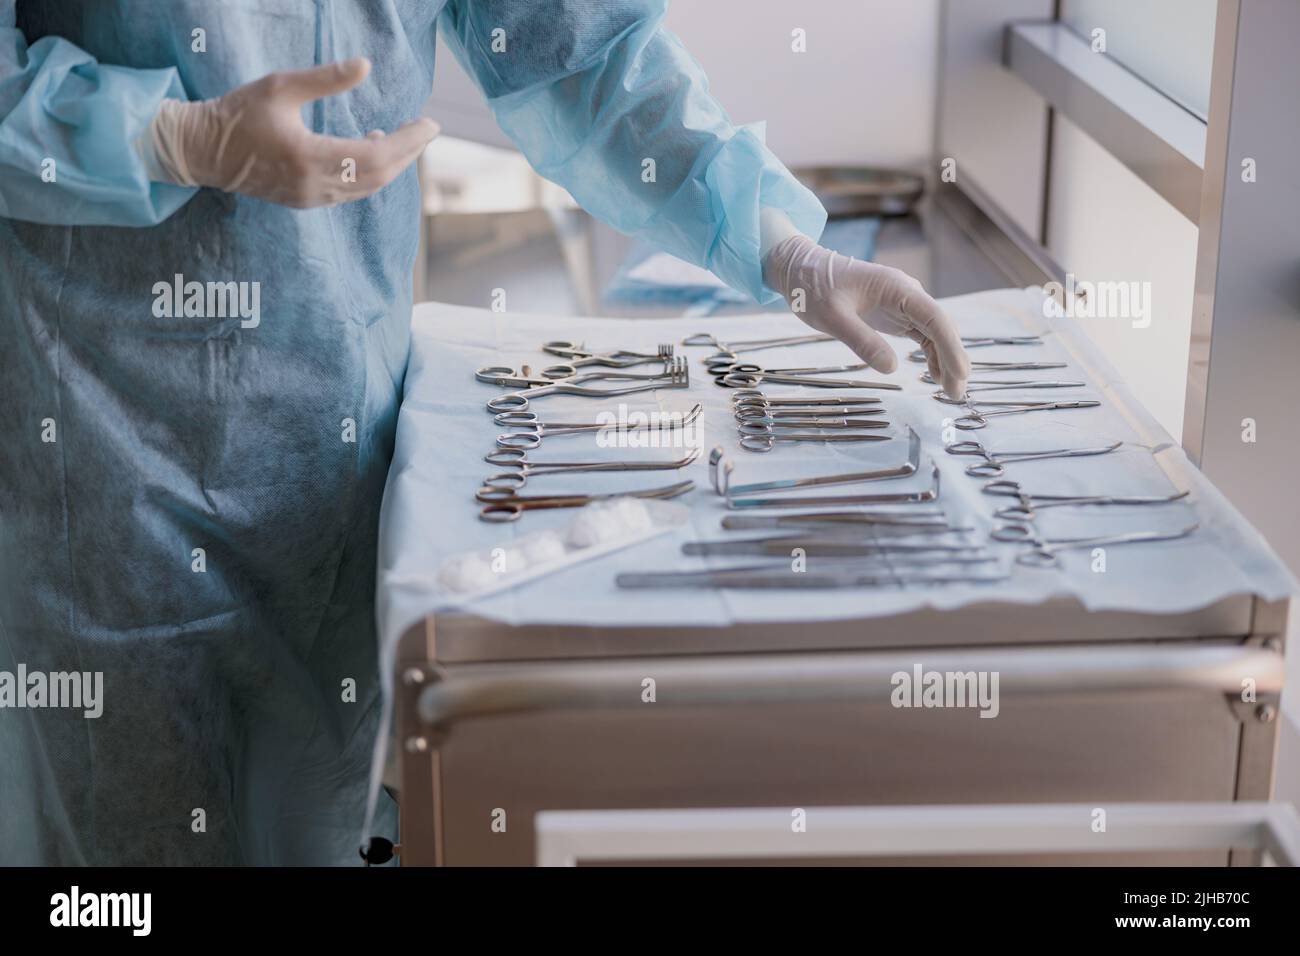 Nurse hand taking surgical instruments from table for a surgery during operation Stock Photo